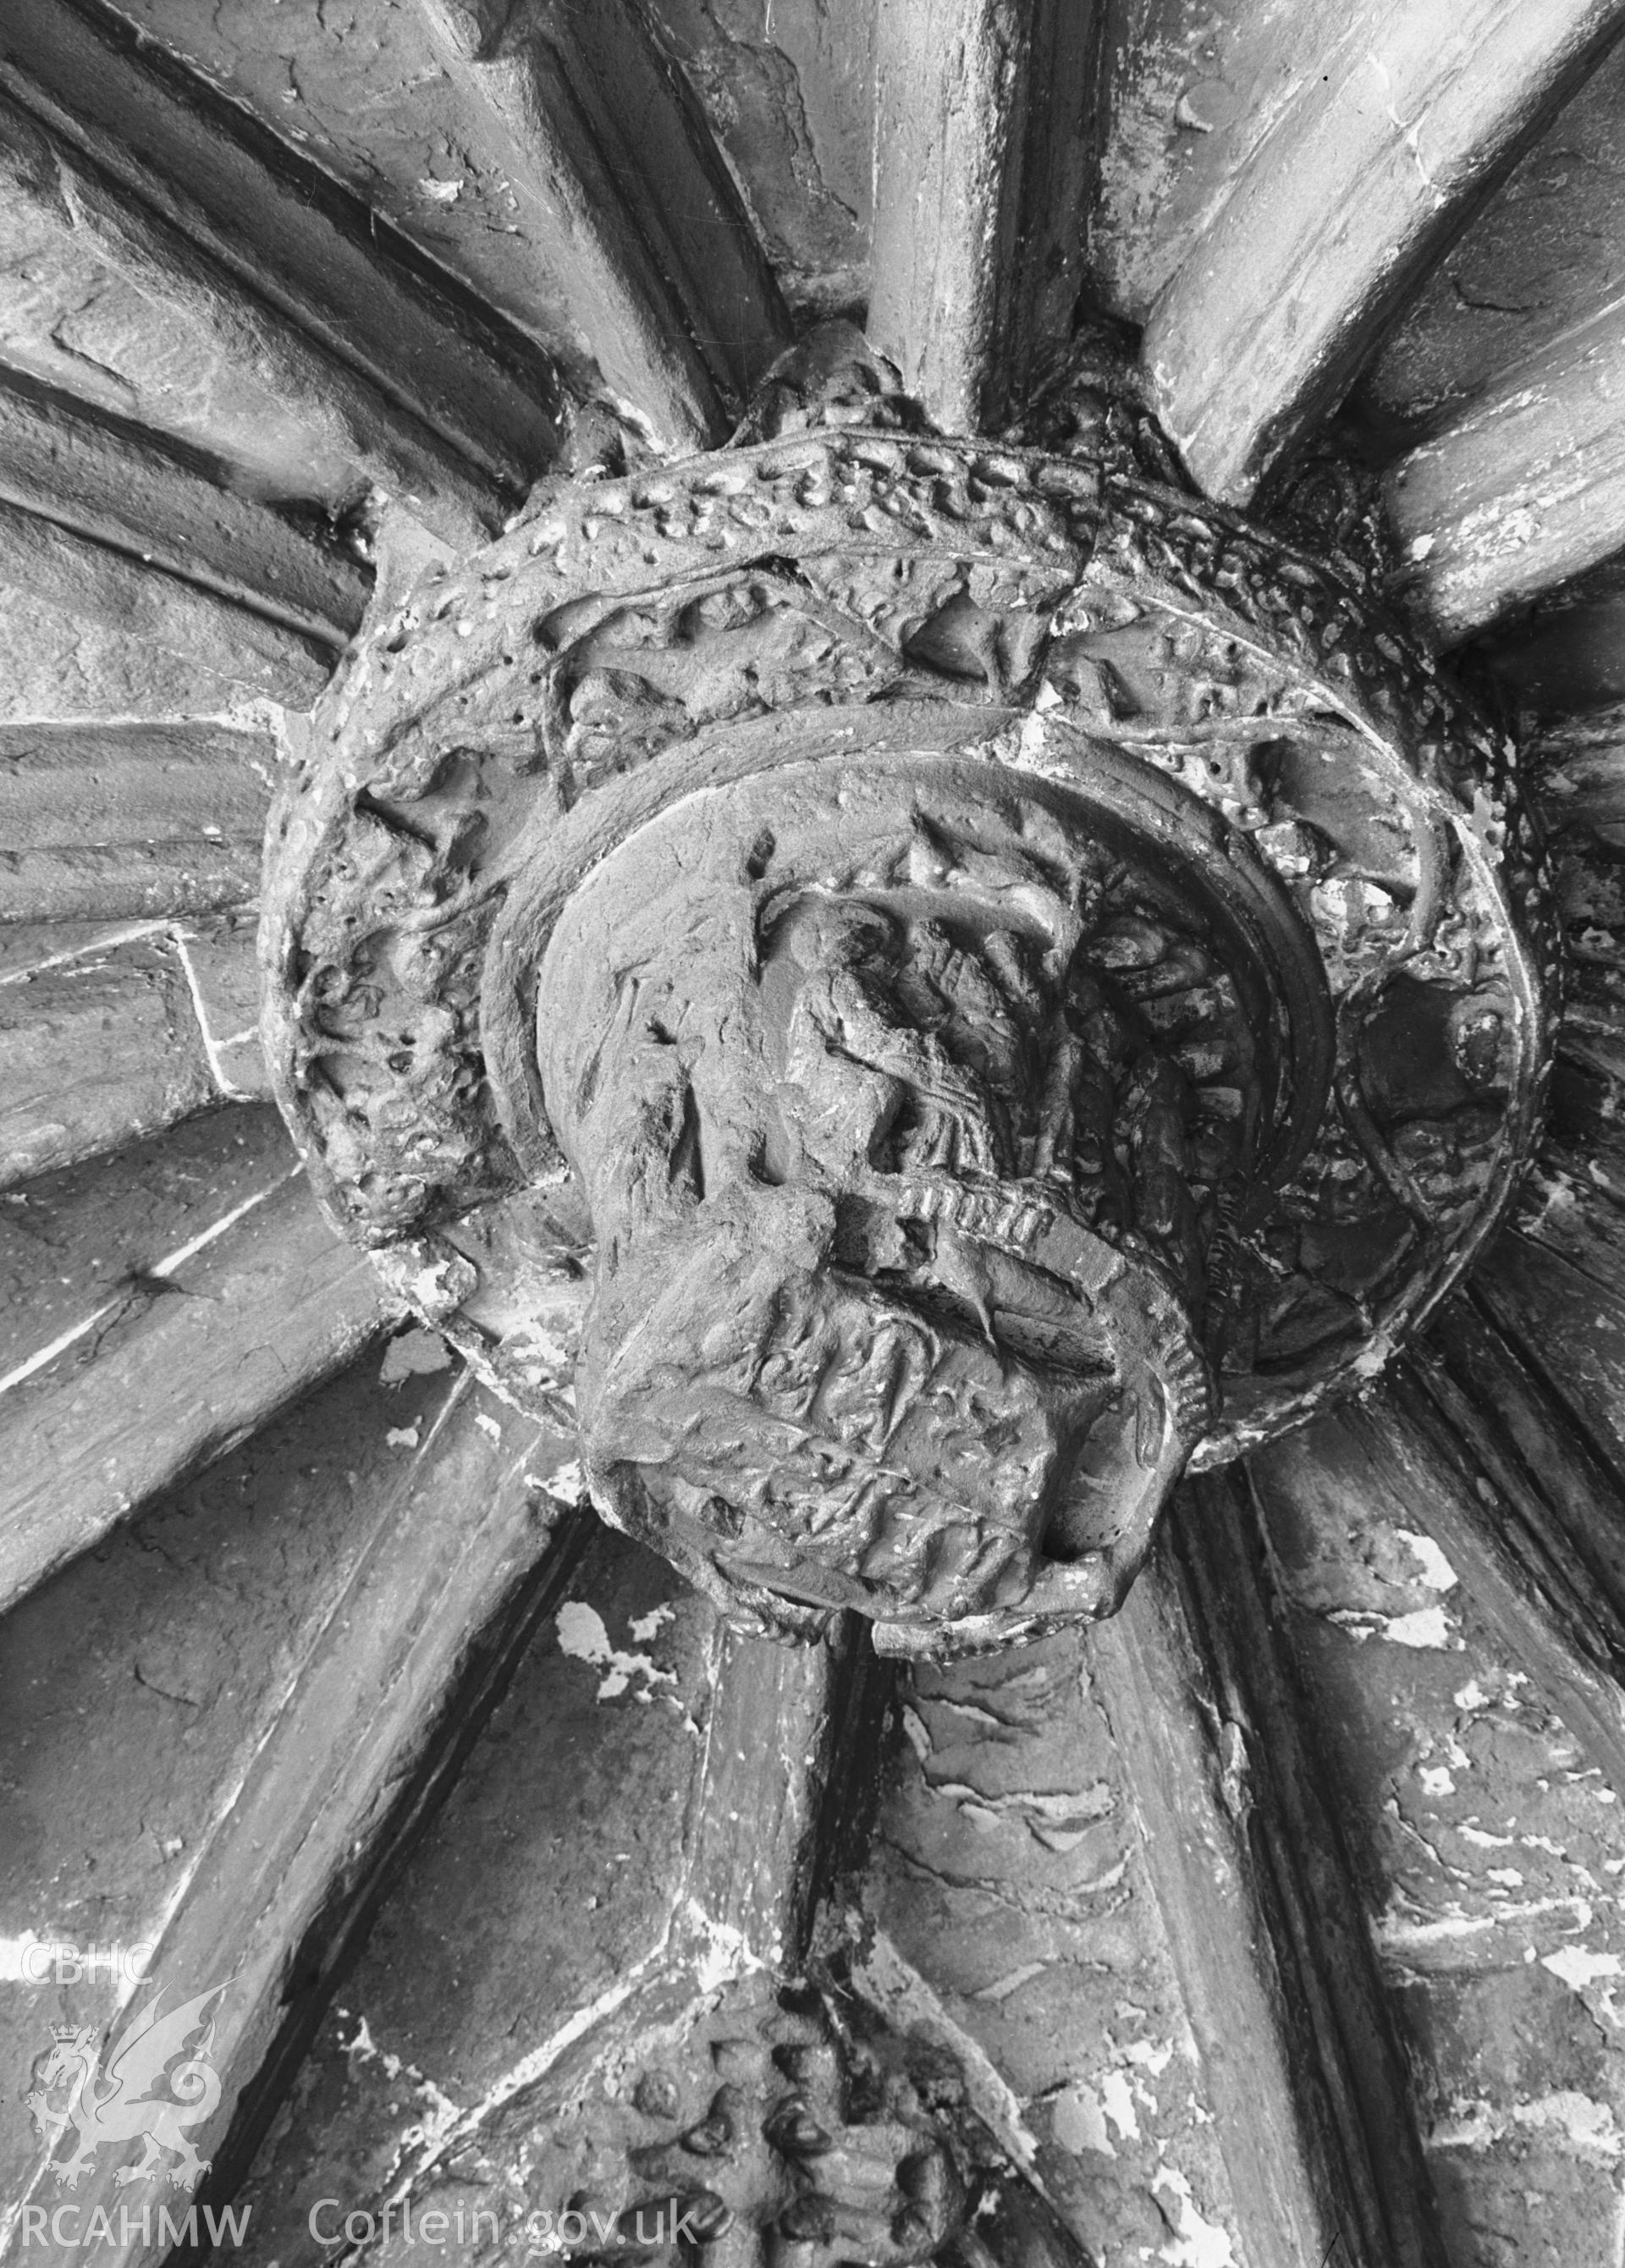 Interior view of the well showing detail of centre boss above the well